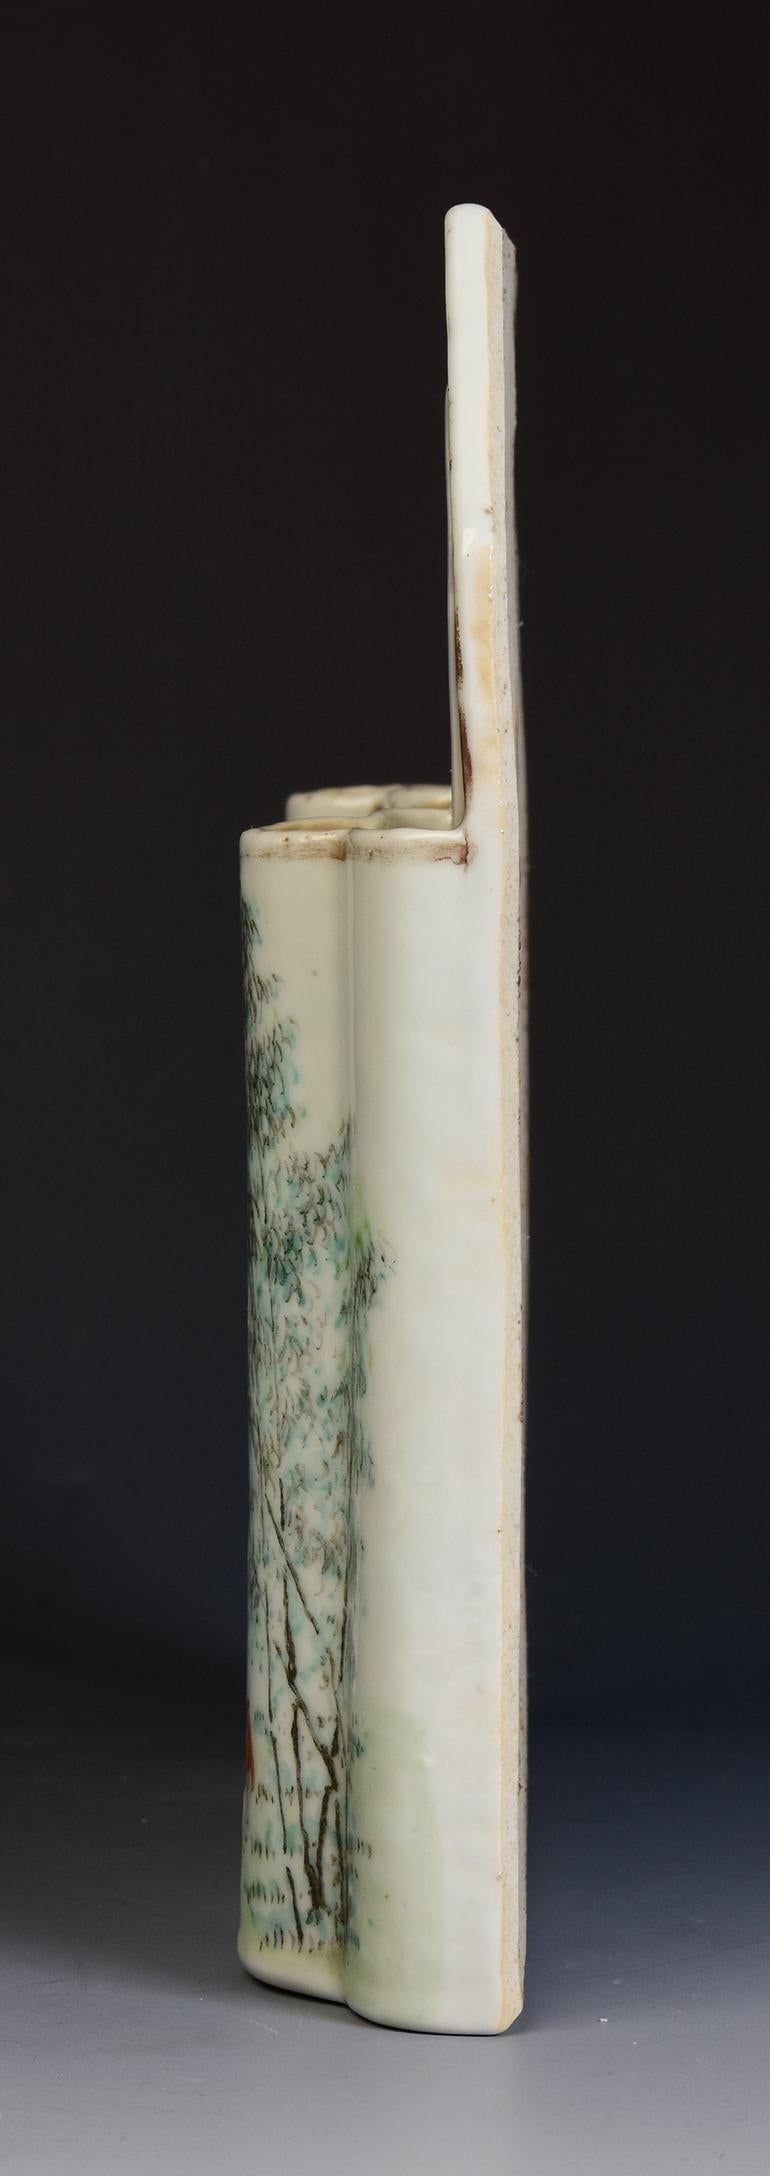 19th Century, Qing Dynasty, Rare Antique Chinese Porcelain Letter Holder For Sale 8